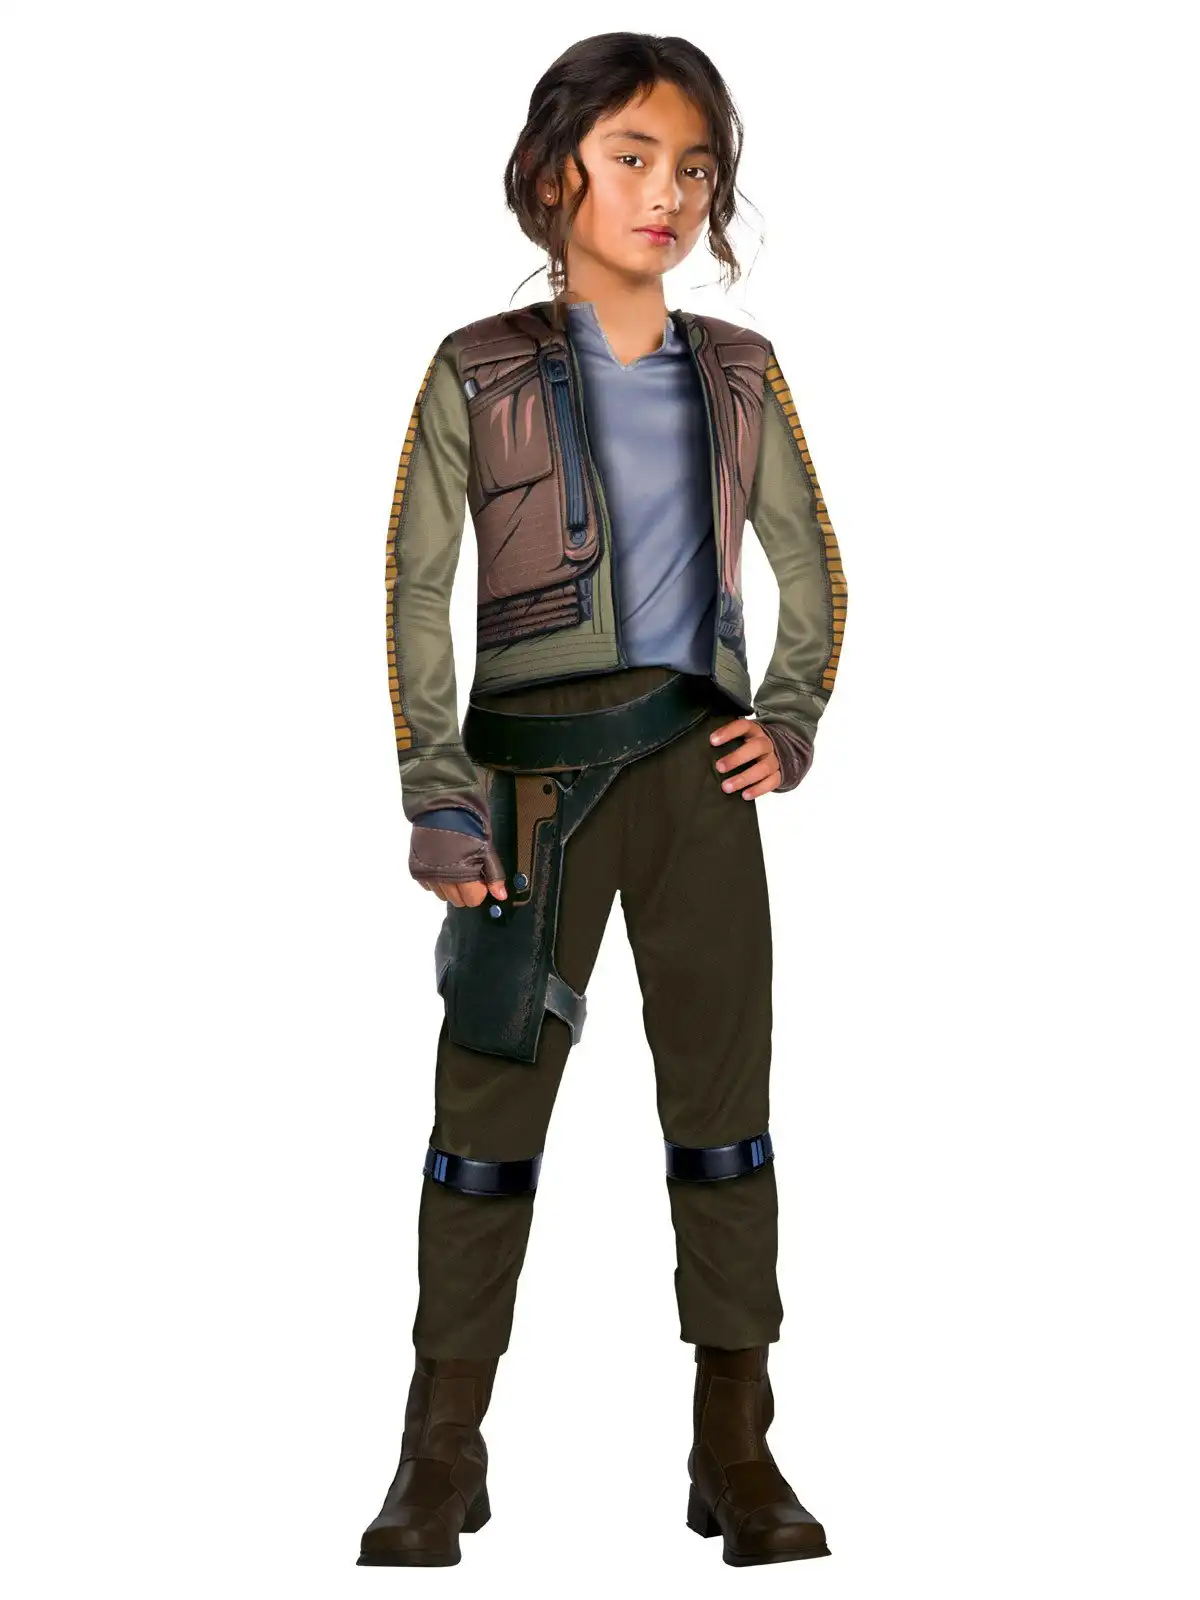 Star Wars Jyn Erso Rogue One Deluxe Kids/Girls Halloween Party Costume Size 6-8